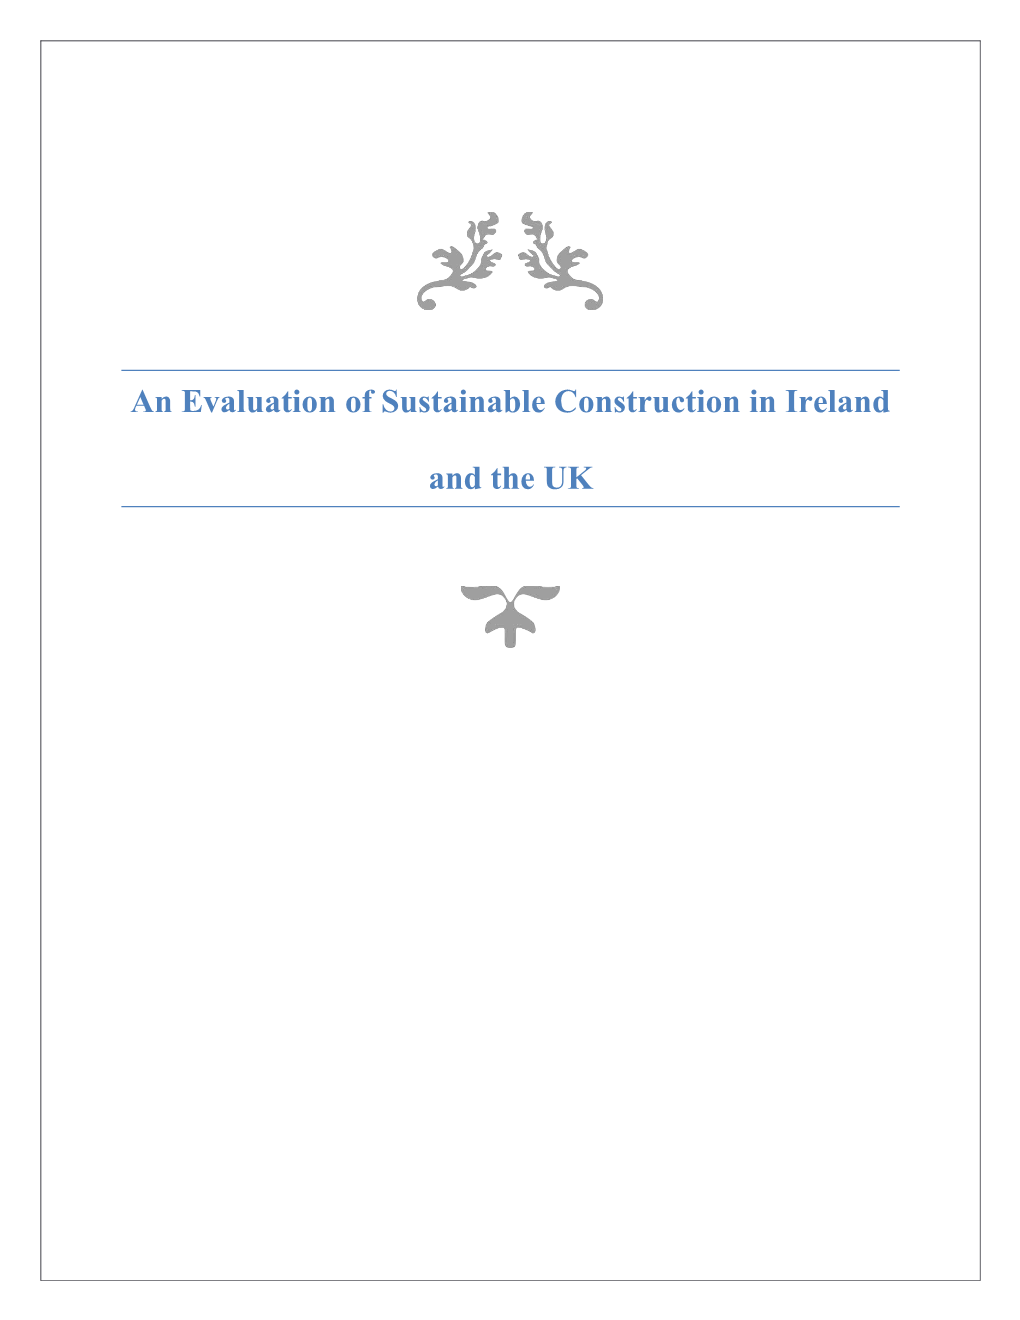 An Evaluation of Sustainable Construction in Ireland and the UK